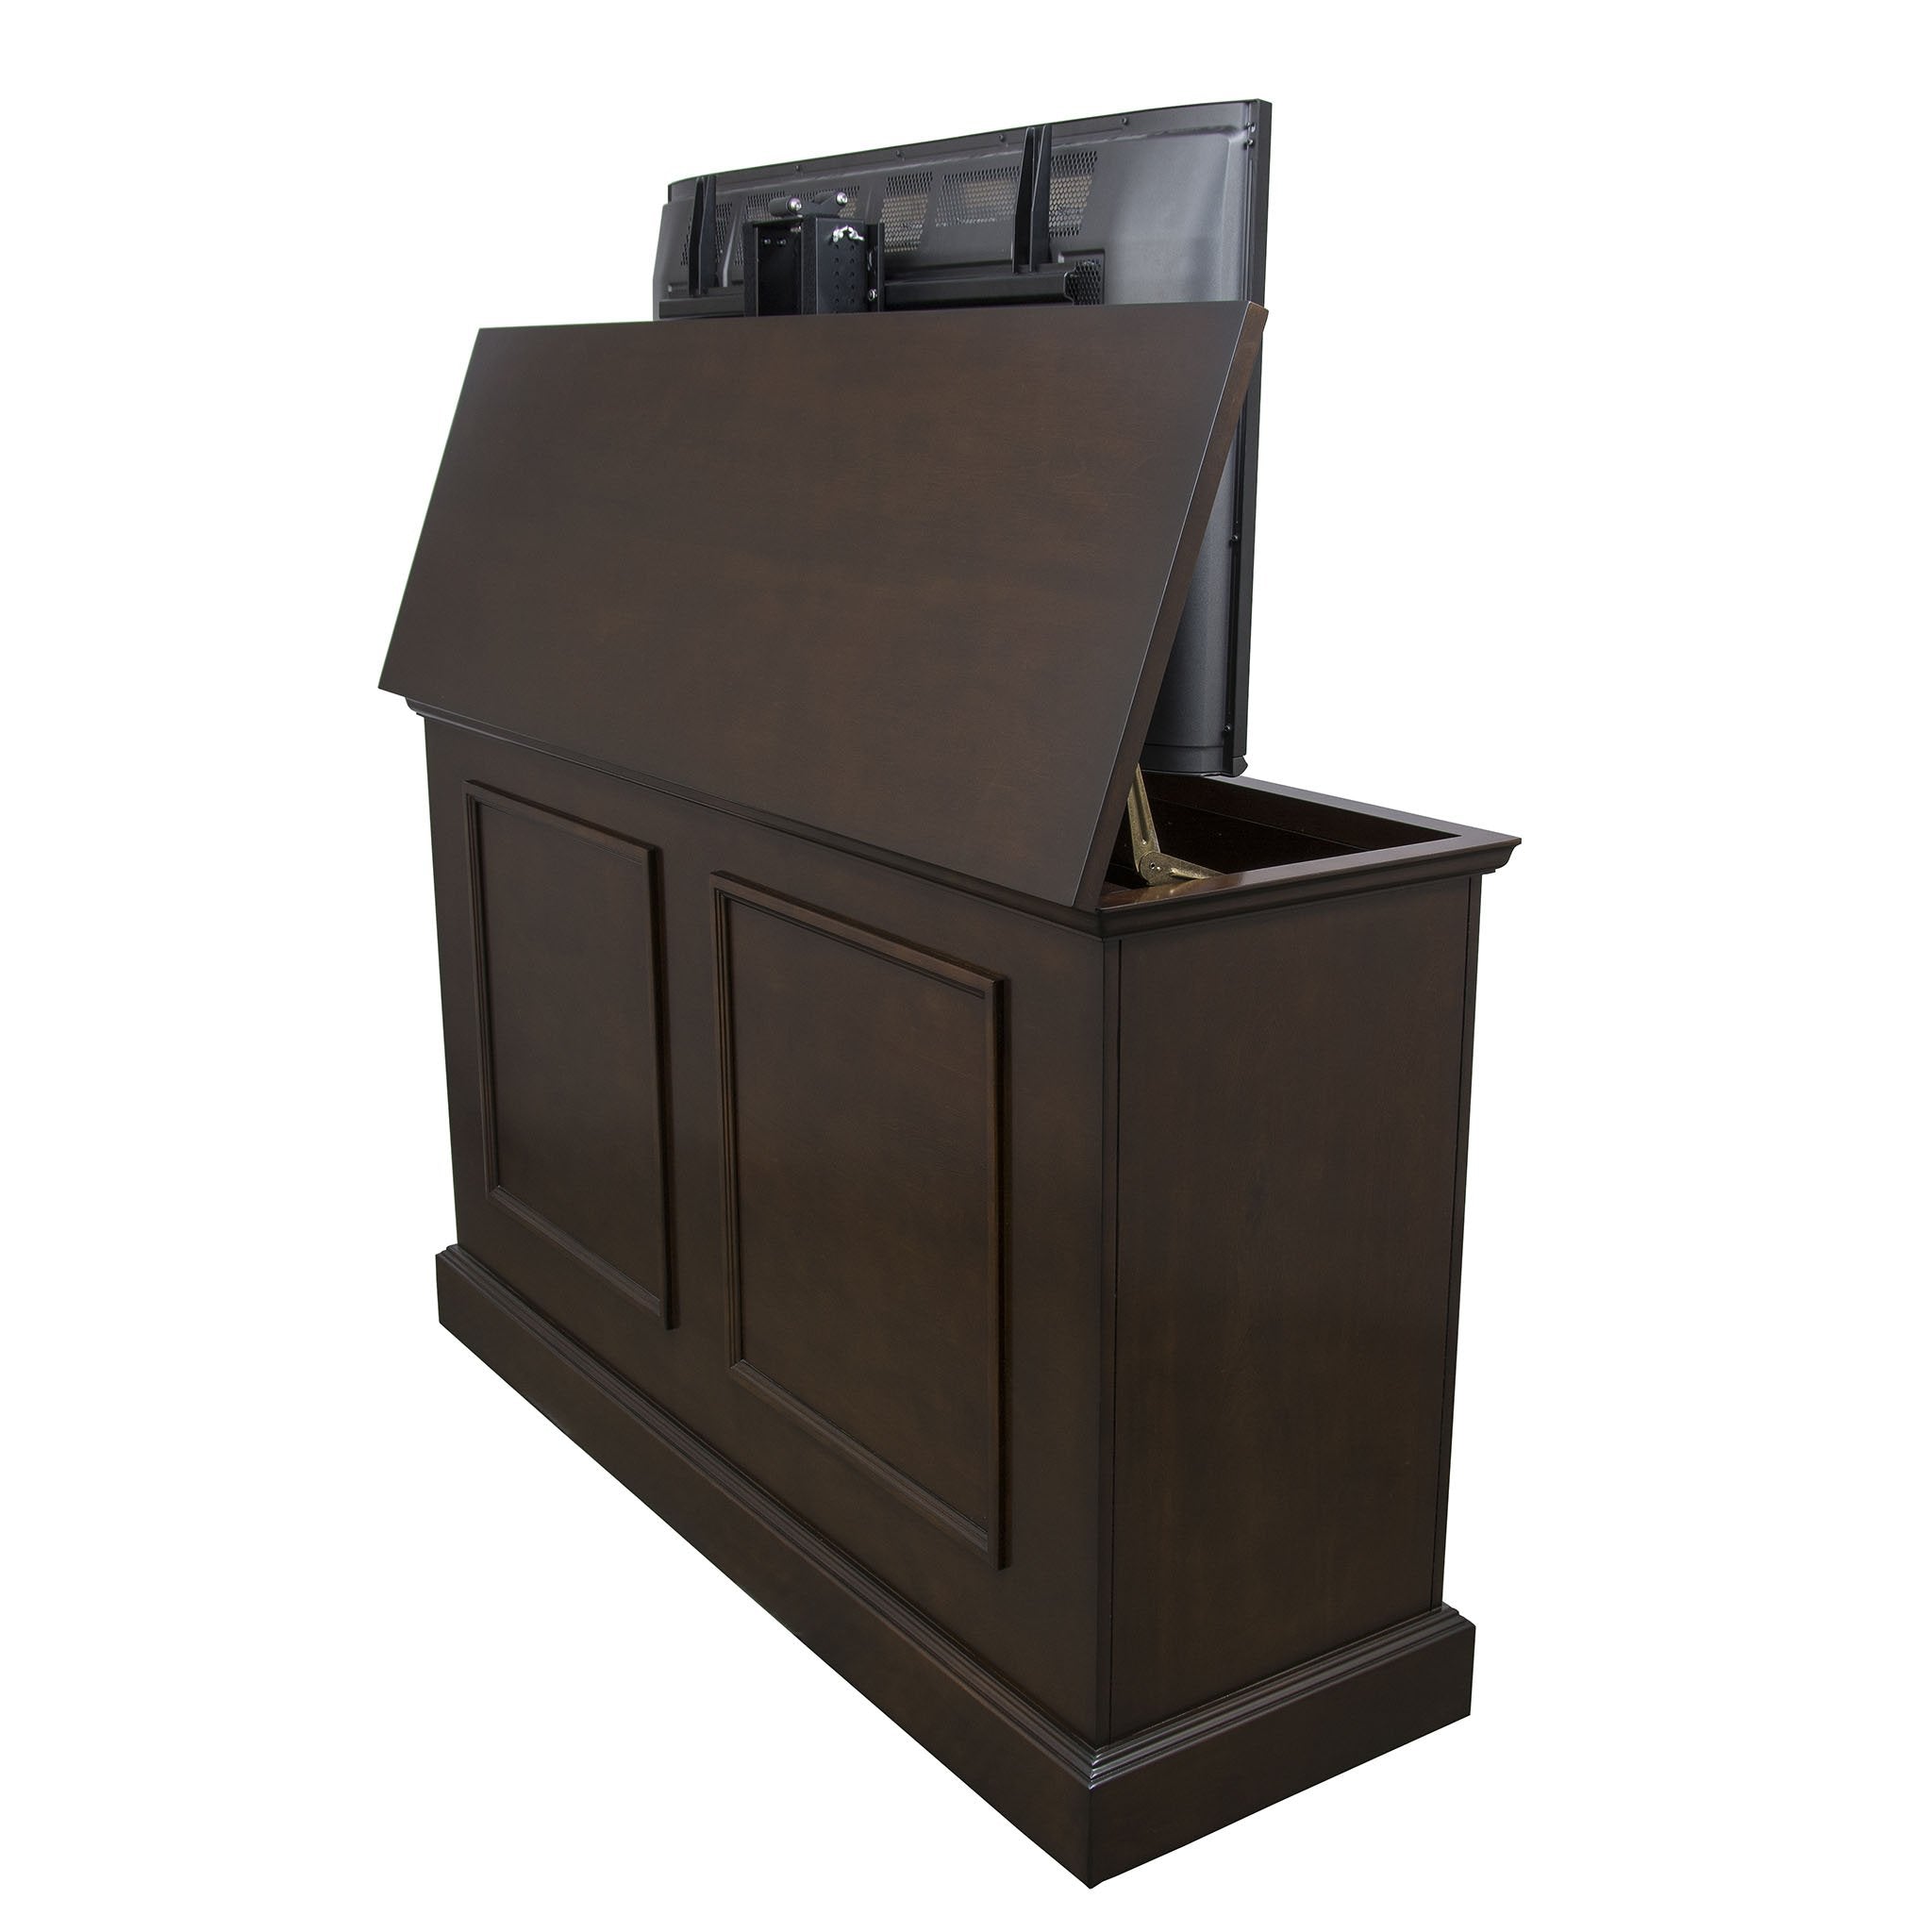 	Grand Elevate 74008 Espresso TV Lift Cabinet for 65 inch Flat screen TVs angled towards the back.